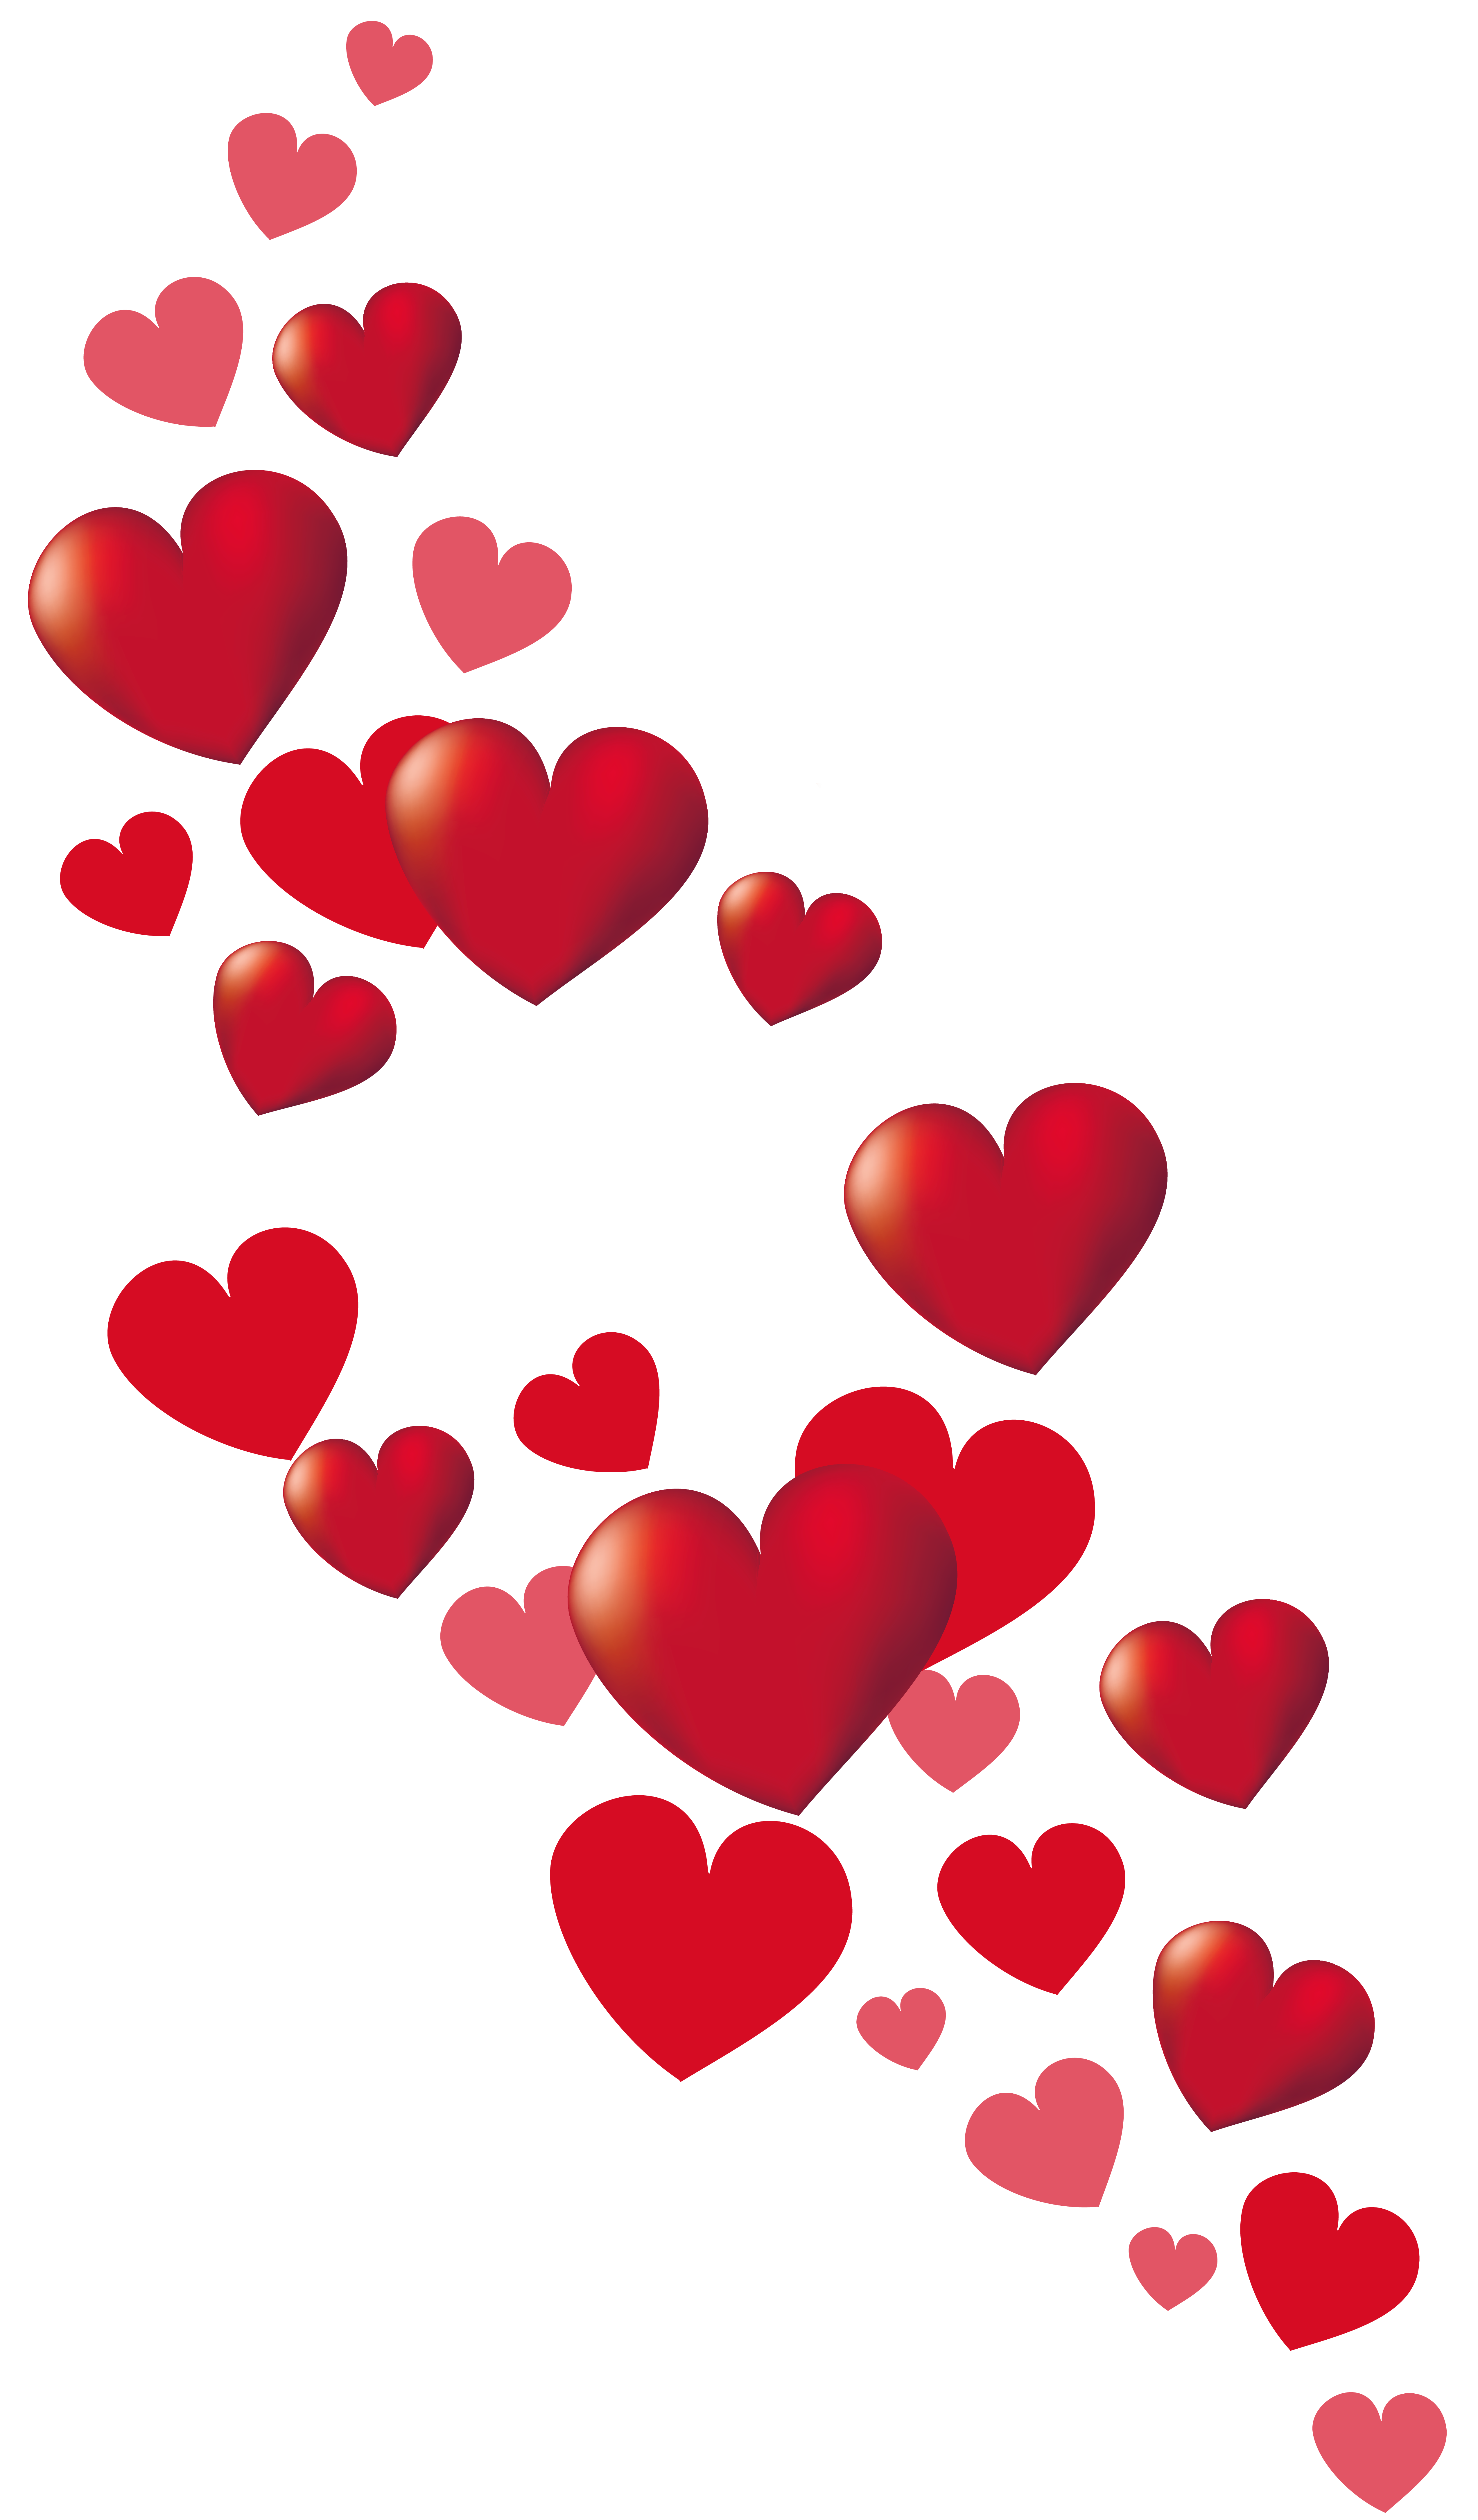 Heart Love Day Valentine HQ Image Free PNG PNG Image